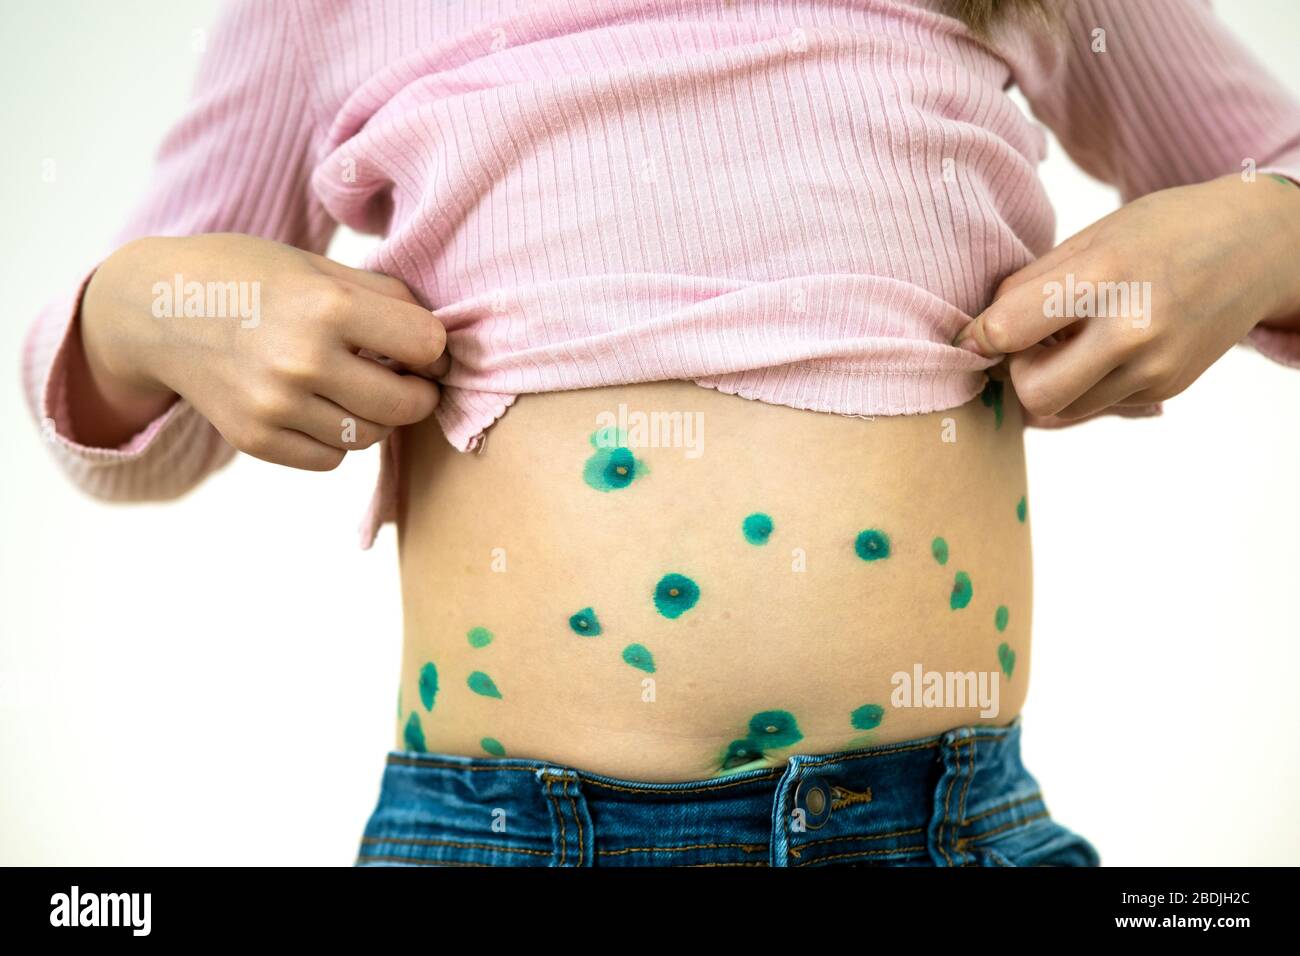 Child covered with green rashes on stomach ill with chickenpox, measles or rubella virus. Stock Photo